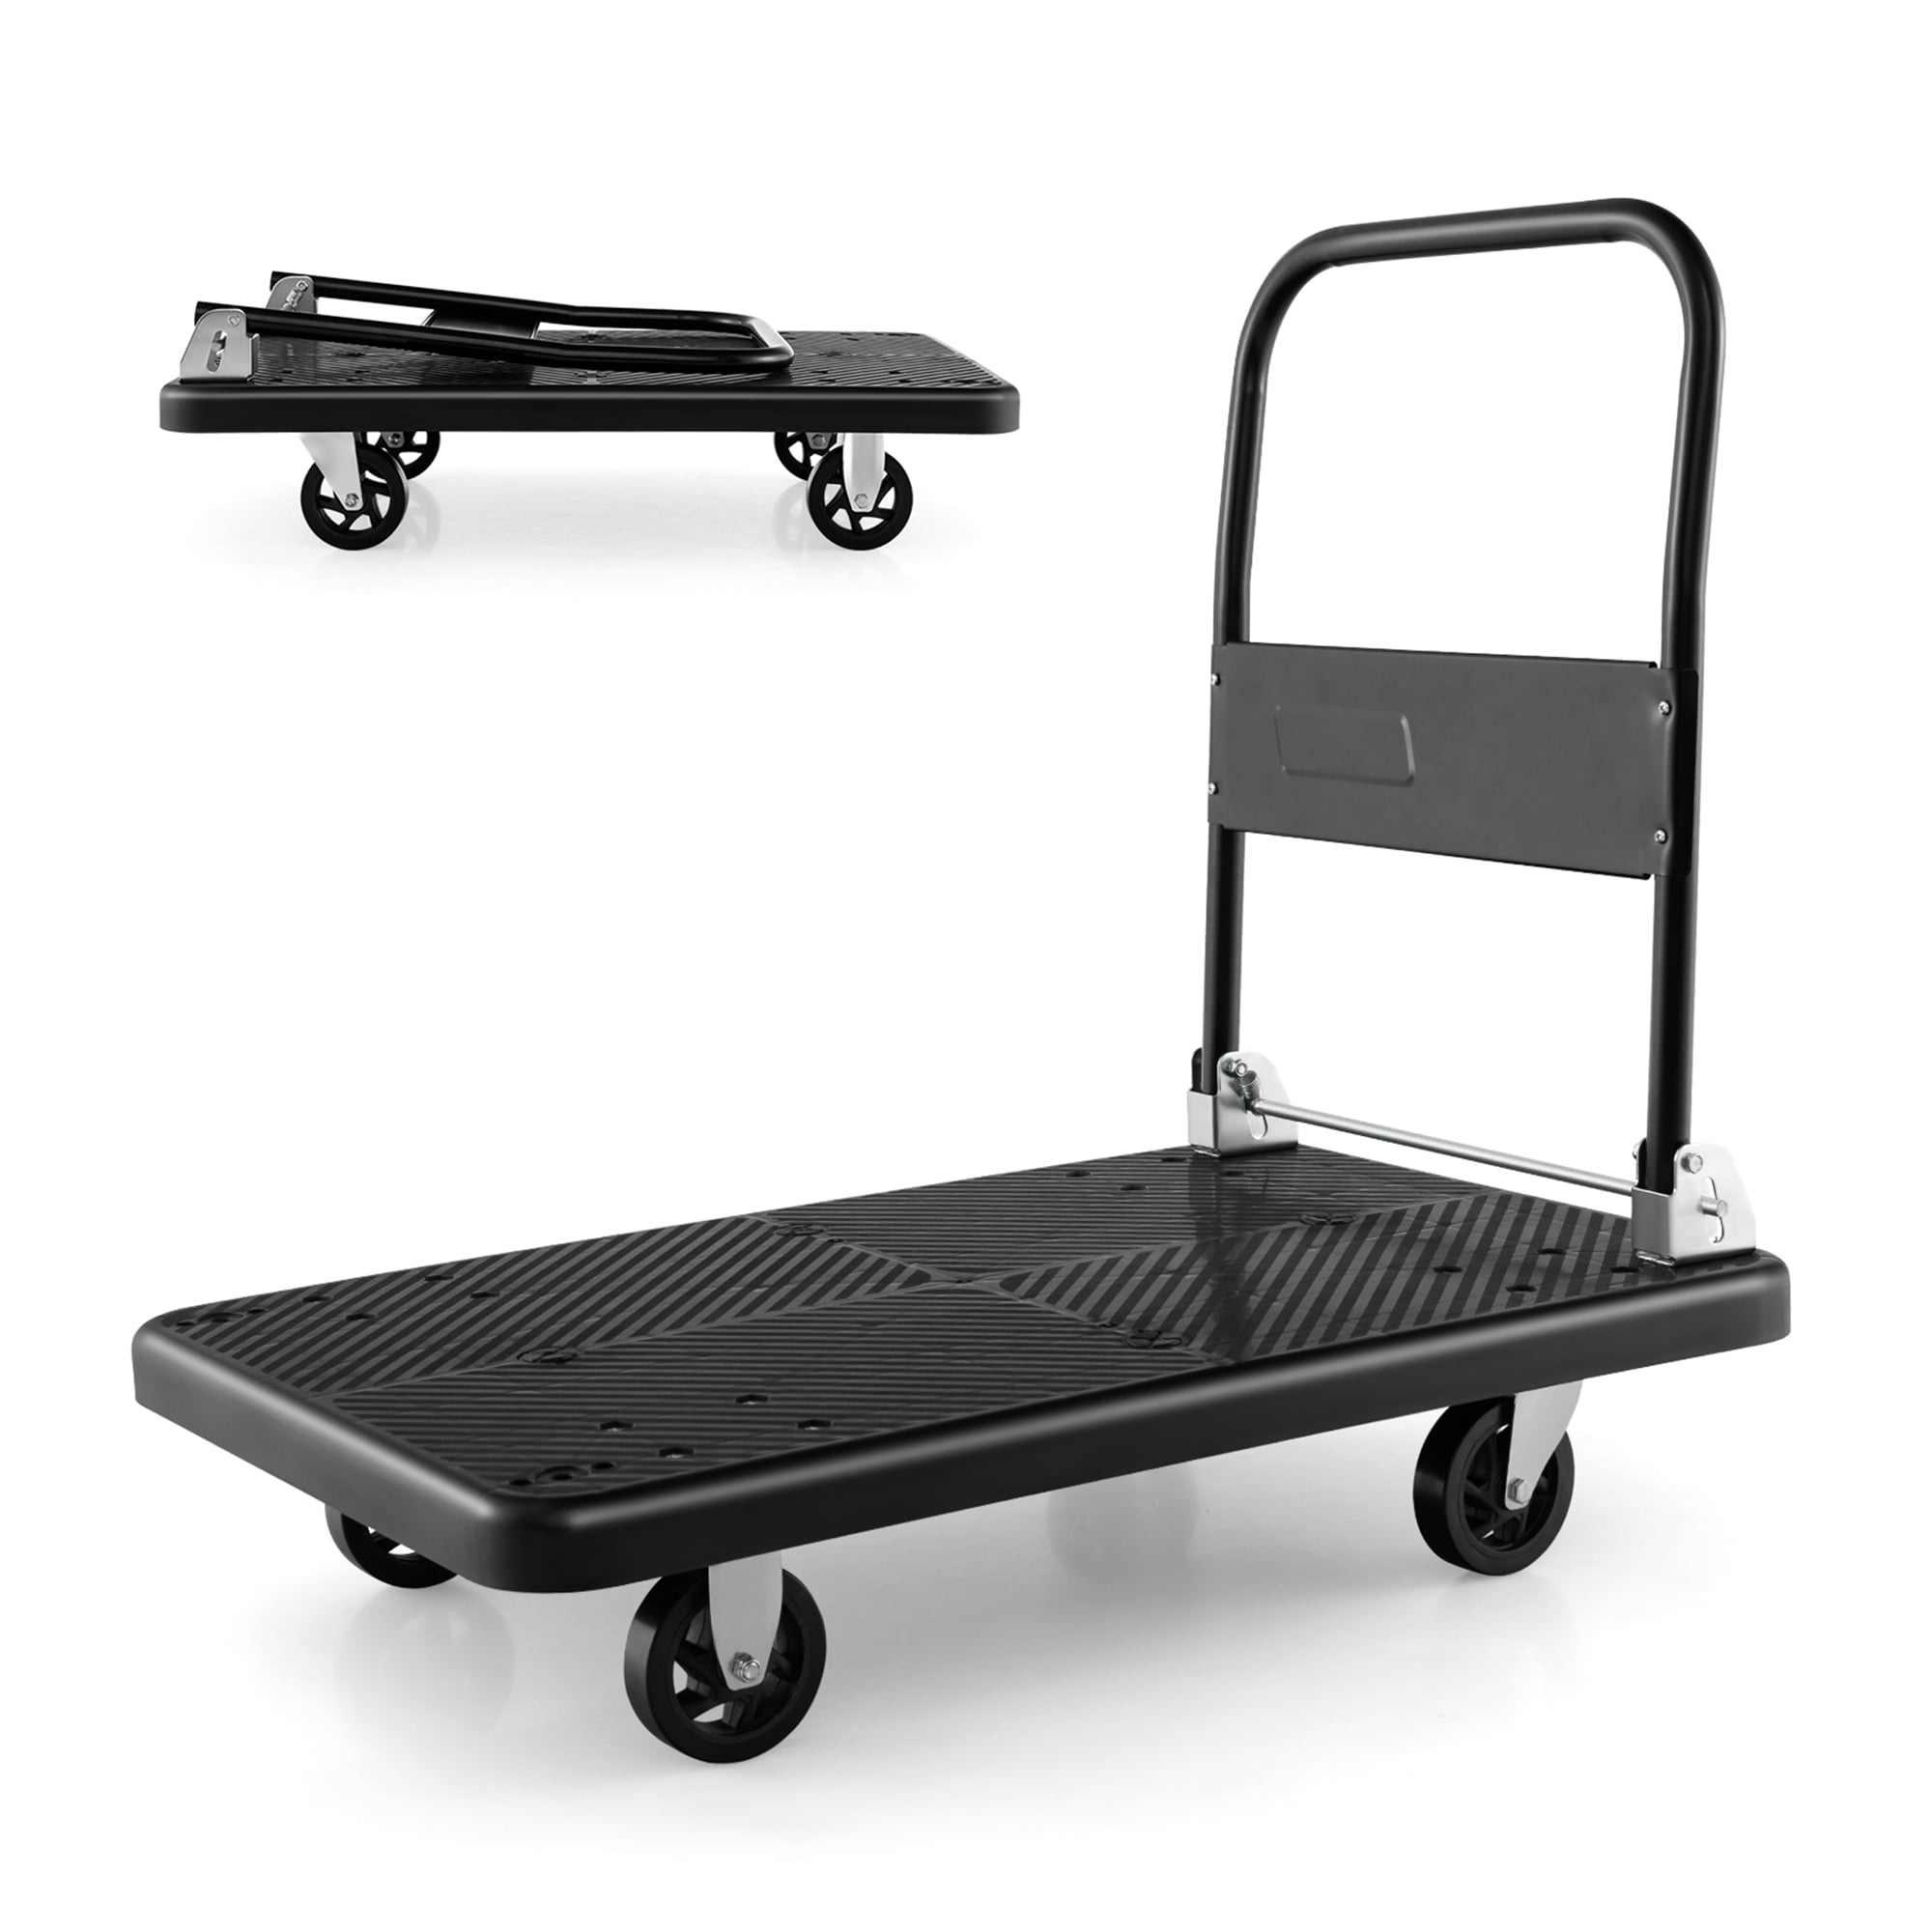 Dolly Cart - Moving Cart with Heavy-Duty Roller Wheel Casters - Holds up to  1000lbs for Moving Furniture, Appliances, and More by Stalwart (Blue)